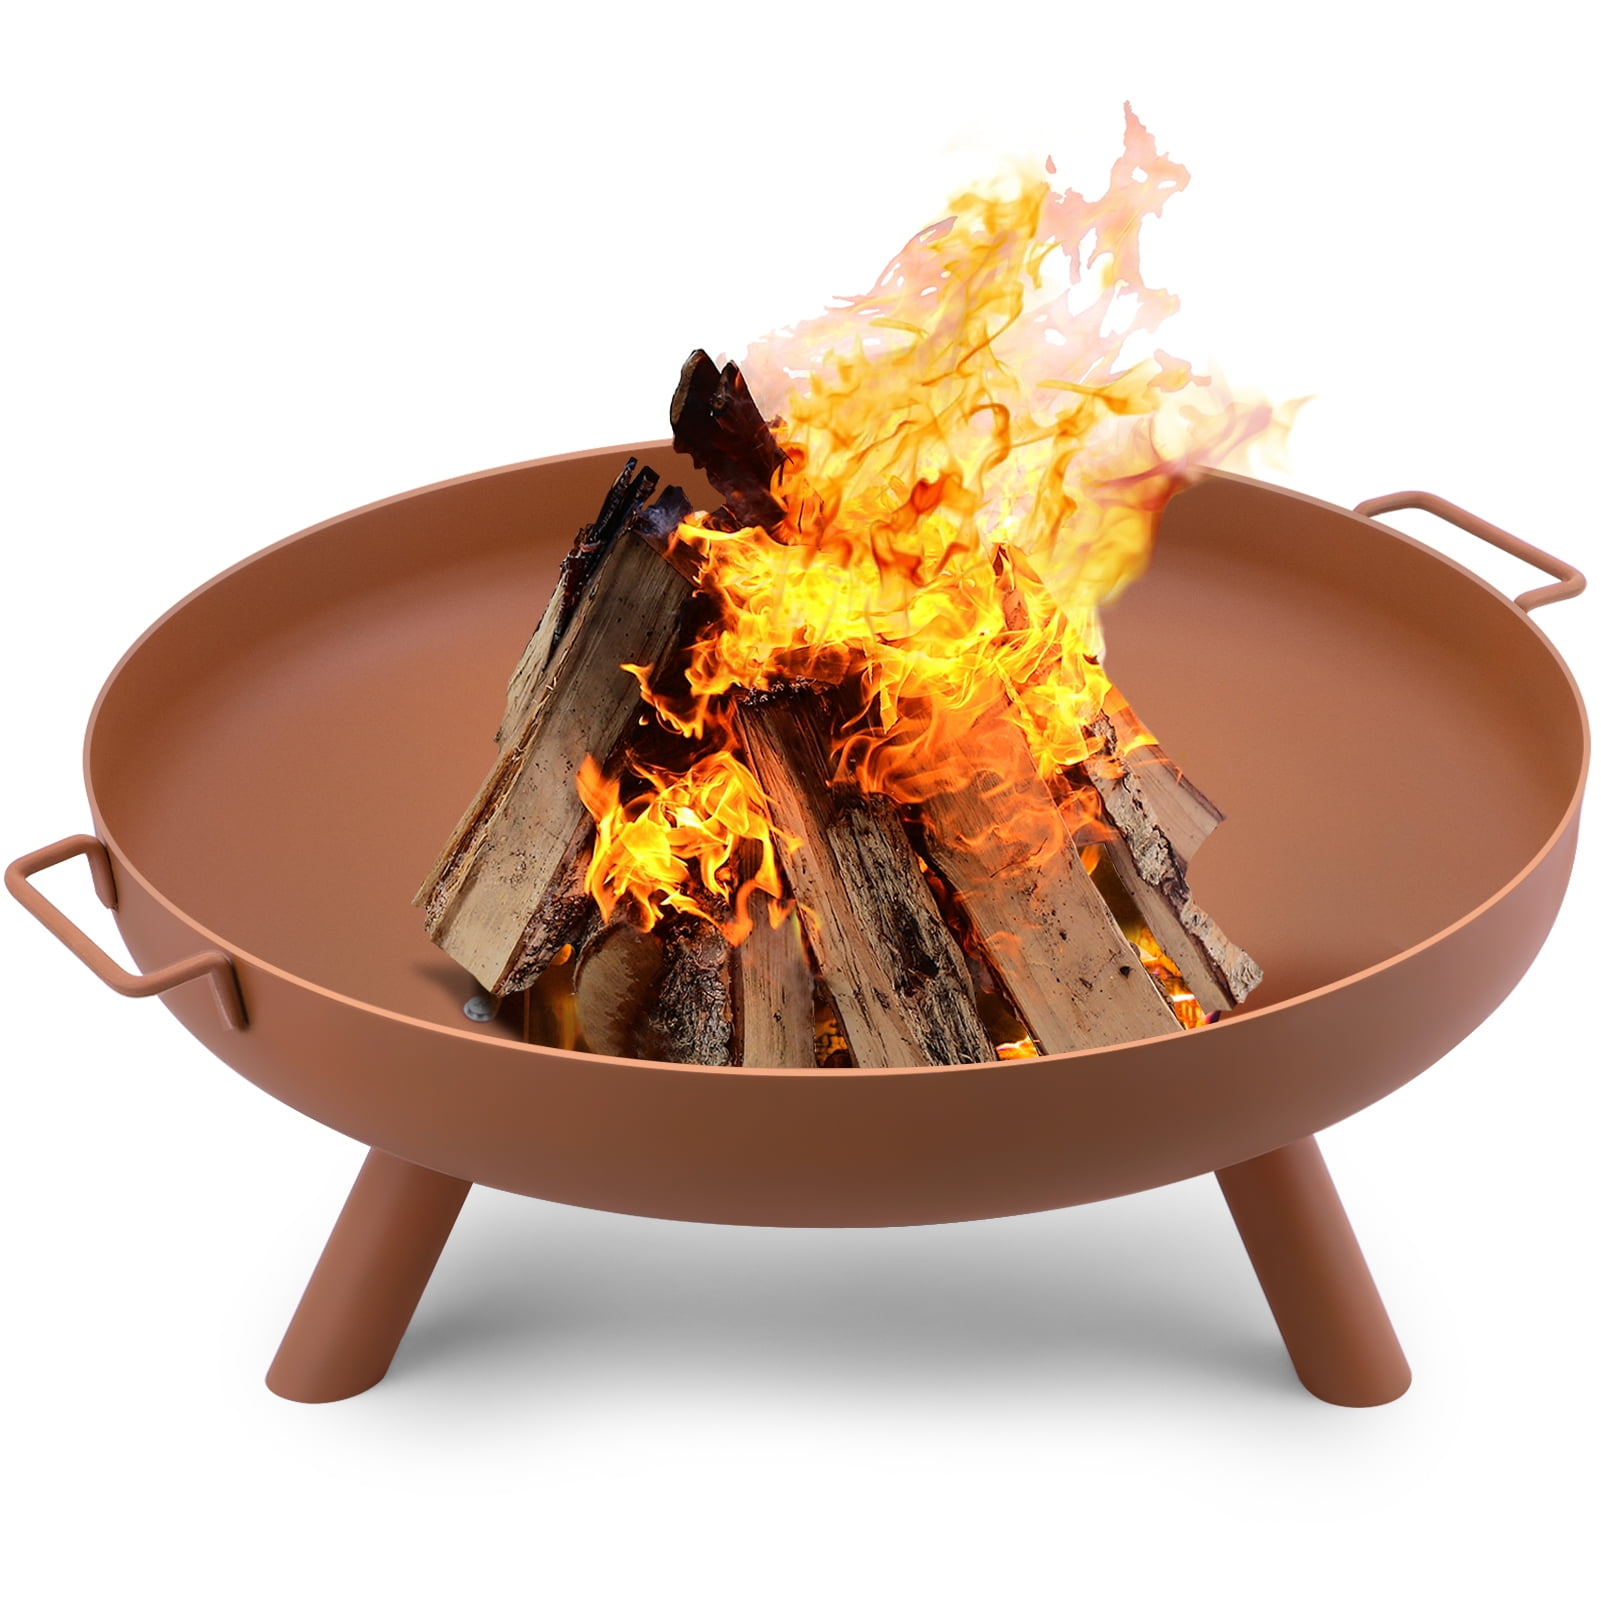 Fire Pit Outdoor Wood Burning Bowl, Round Iron Fire Pit